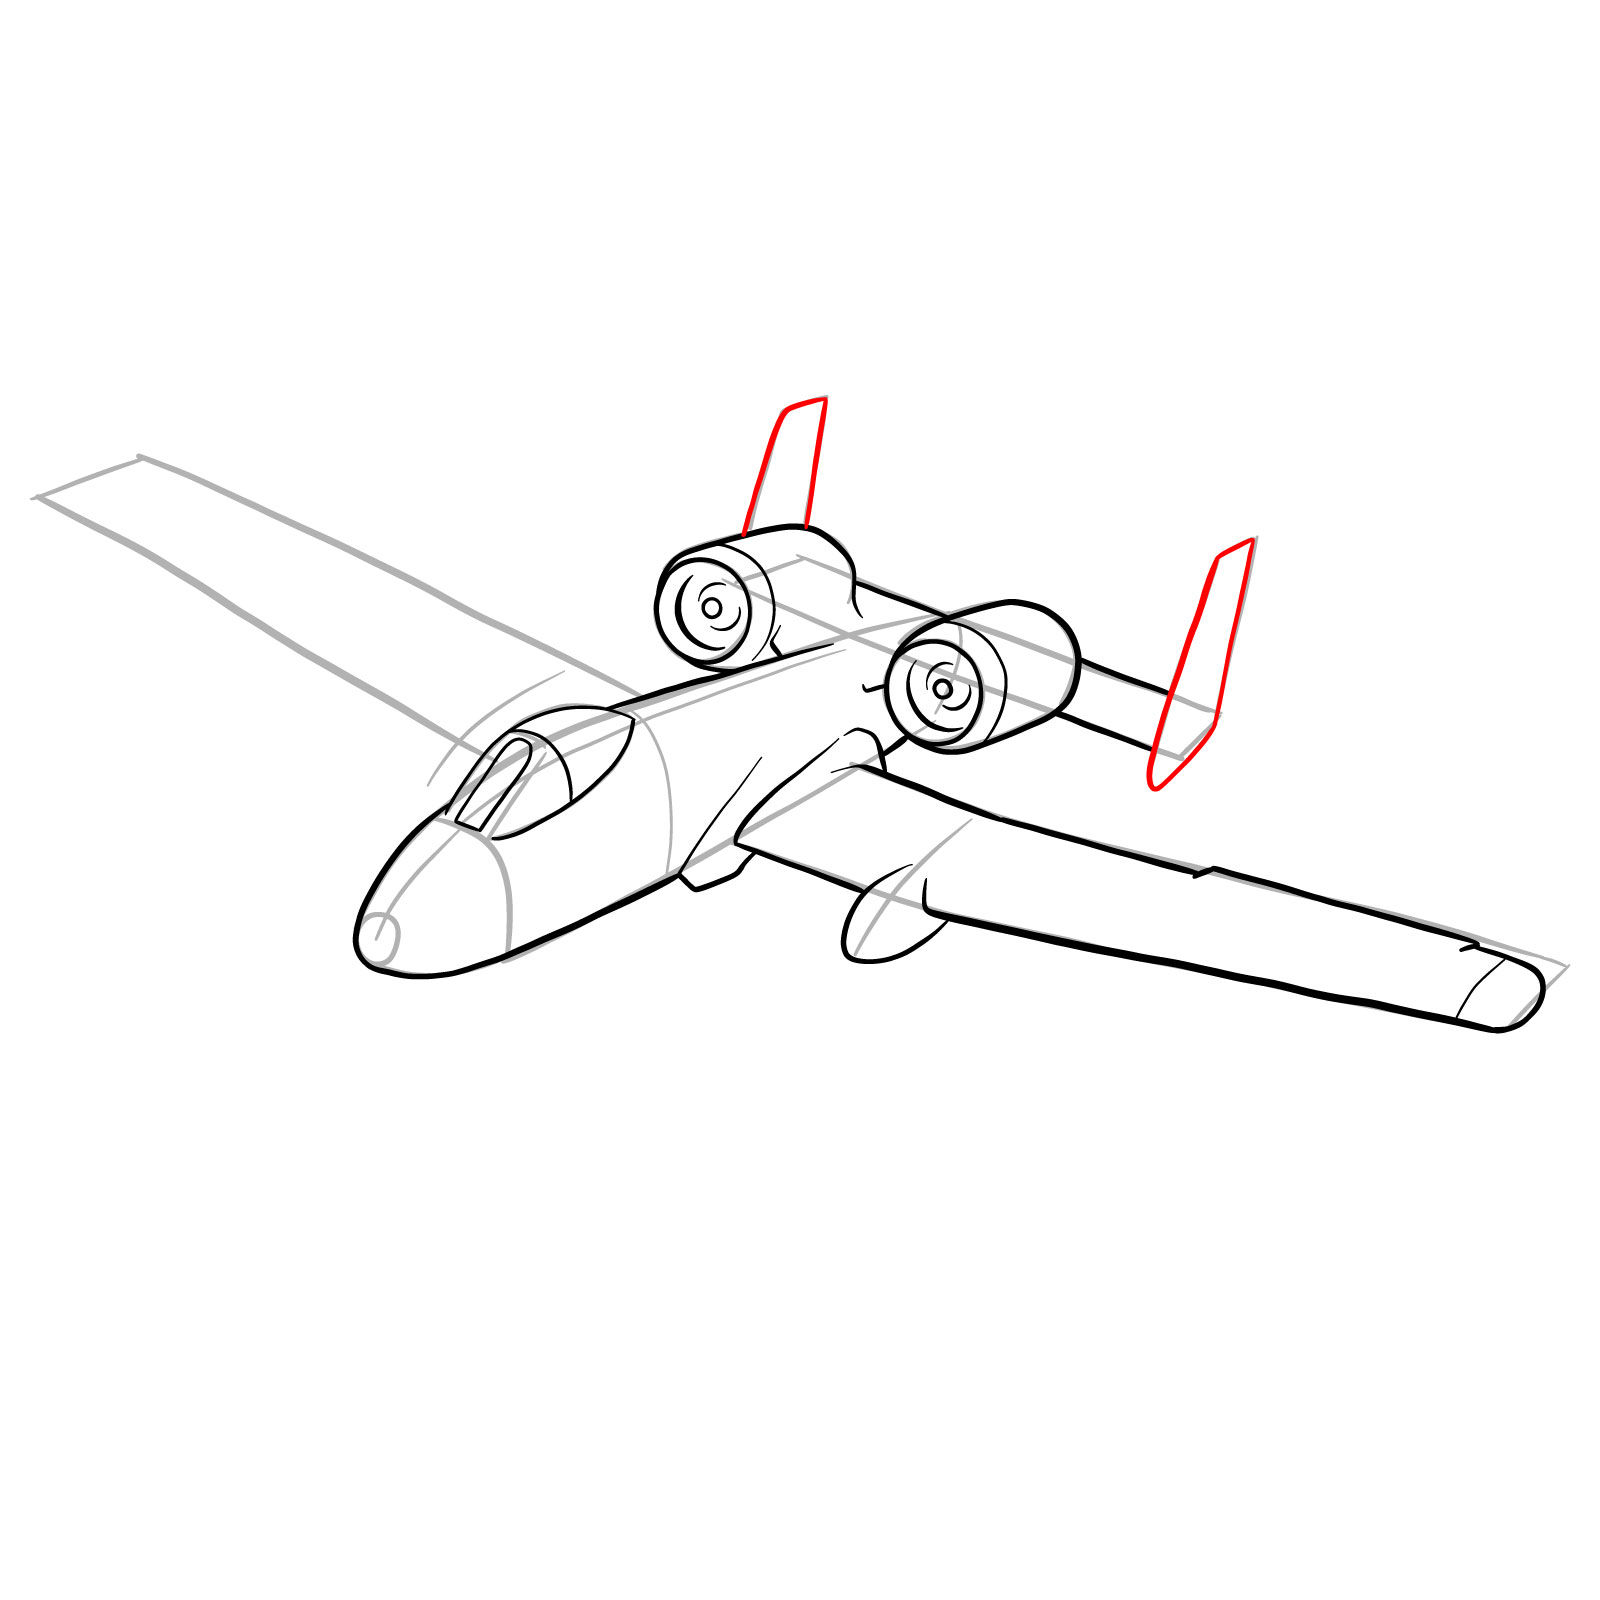 How to draw A-10 Thunderbolt II - step 19